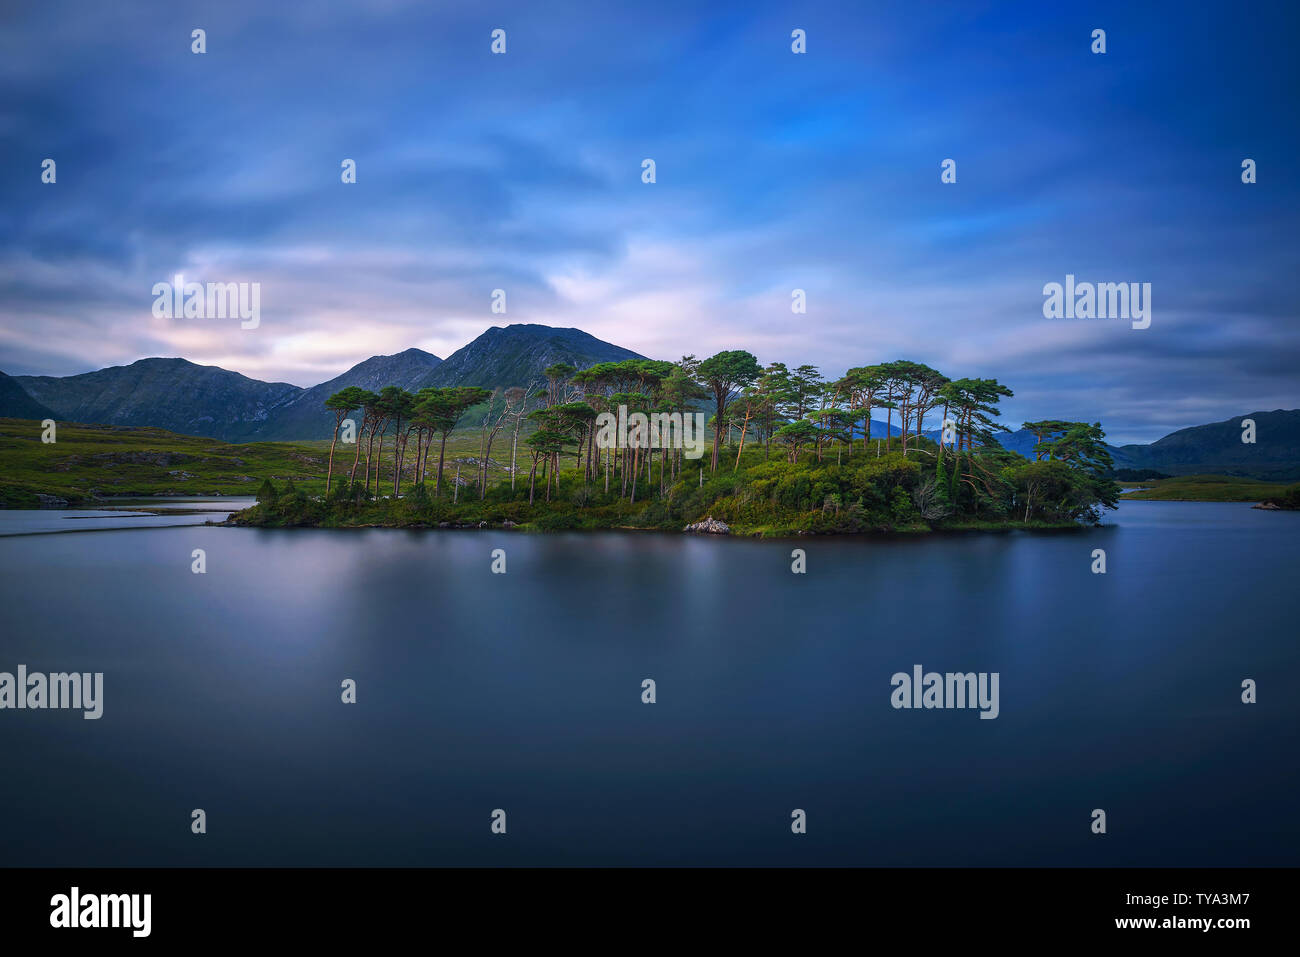 Pine Trees Island in the Derryclare Lake at sunset Stock Photo